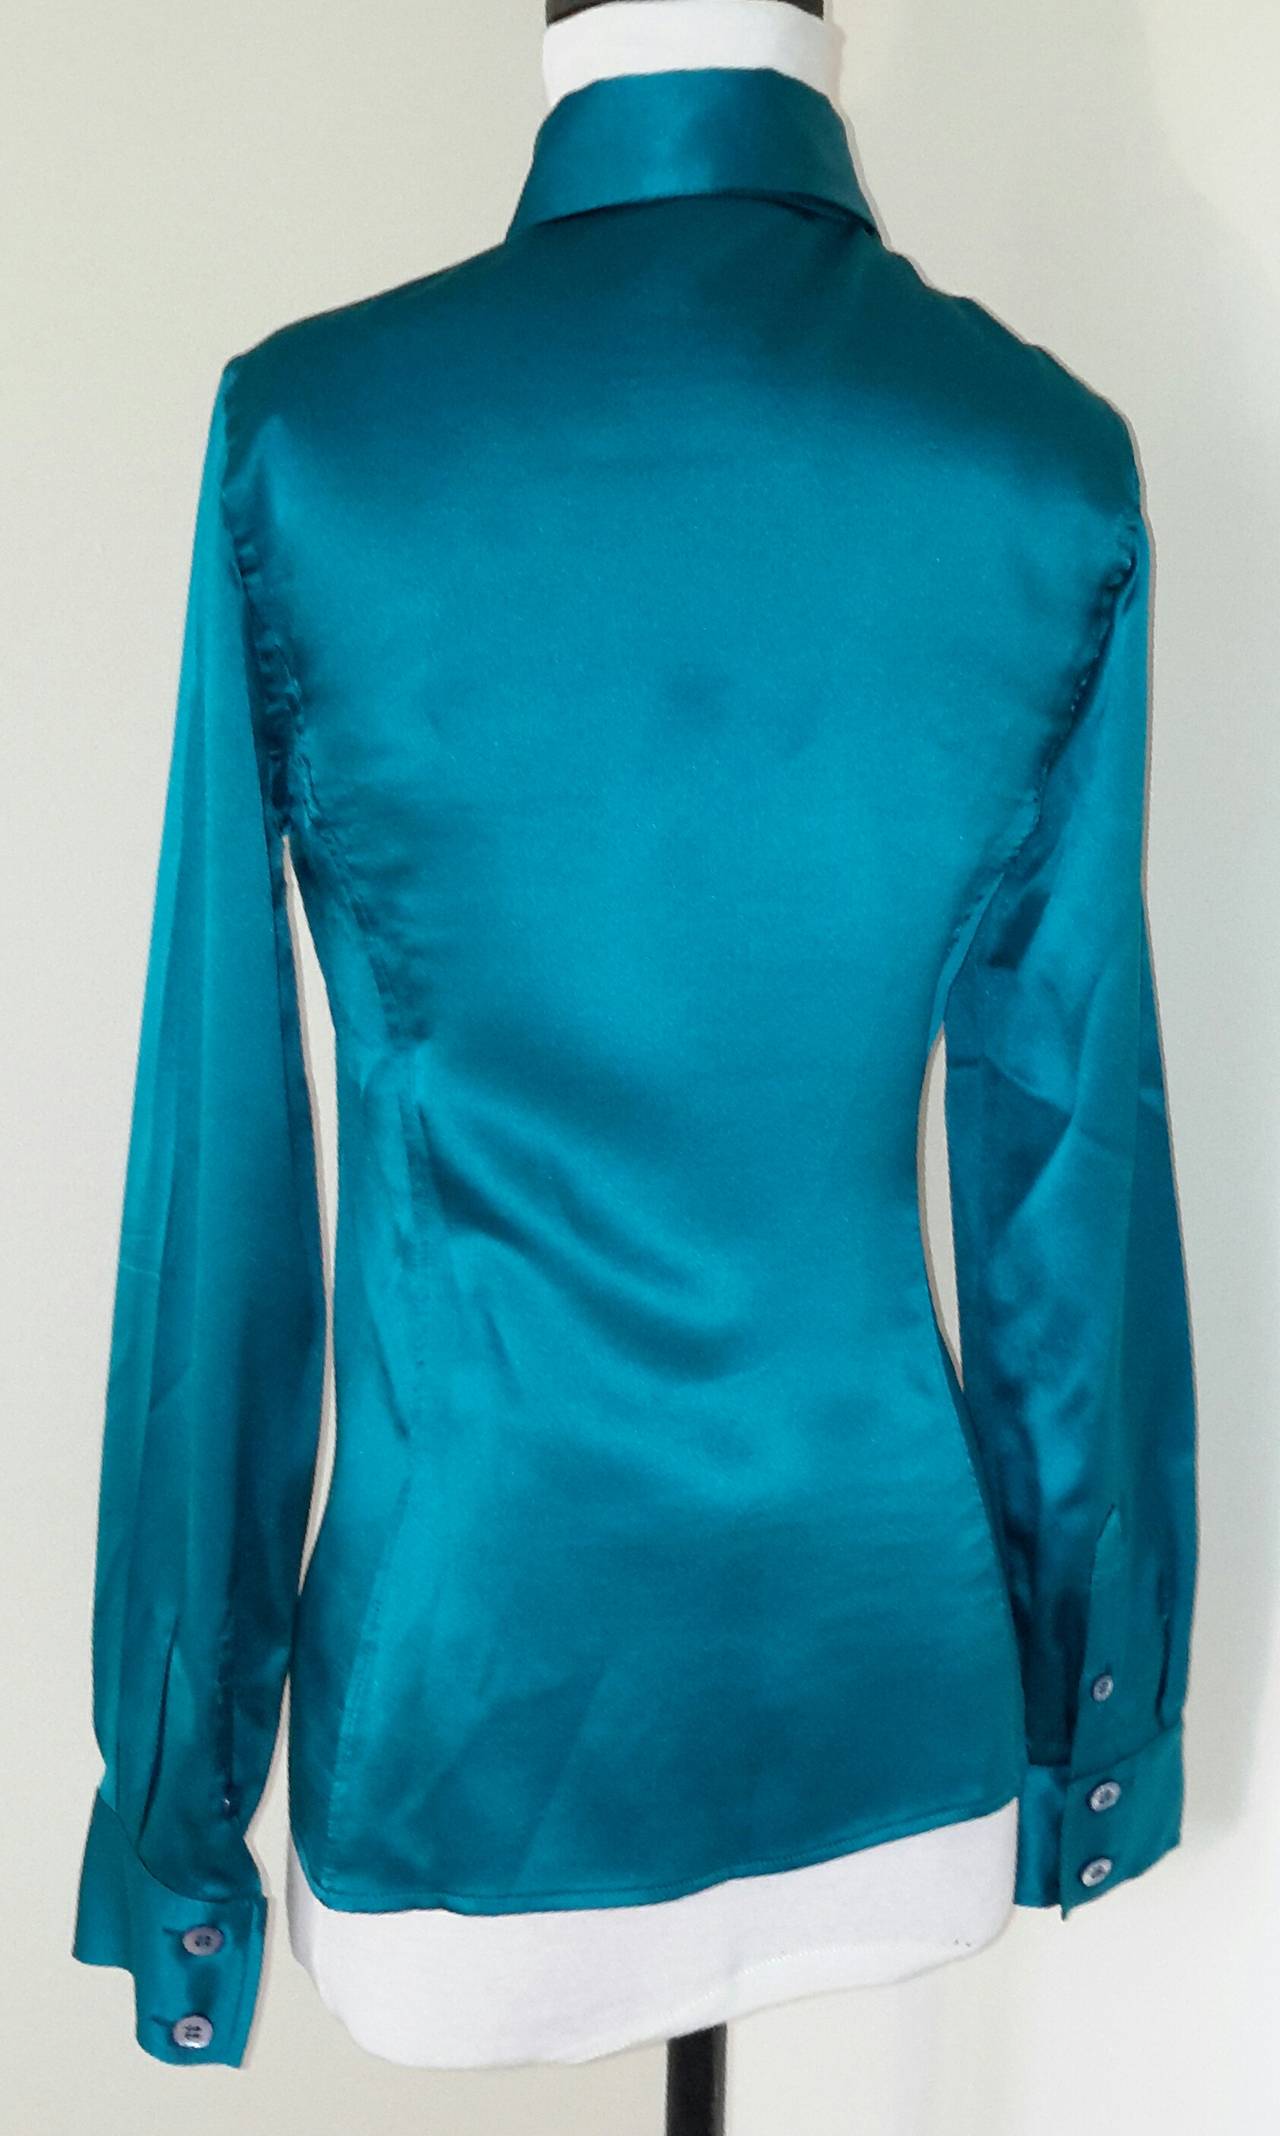 Tom Ford for Gucci Fall 1995 famous blue silk shirt as worn by Madonna, on the runway by Kate Moss and in the ad campaign, also with various editorials in Vogue and Harpers Bazaar.

This shirt is in amazing condition, and is XS, or IT 38. Please